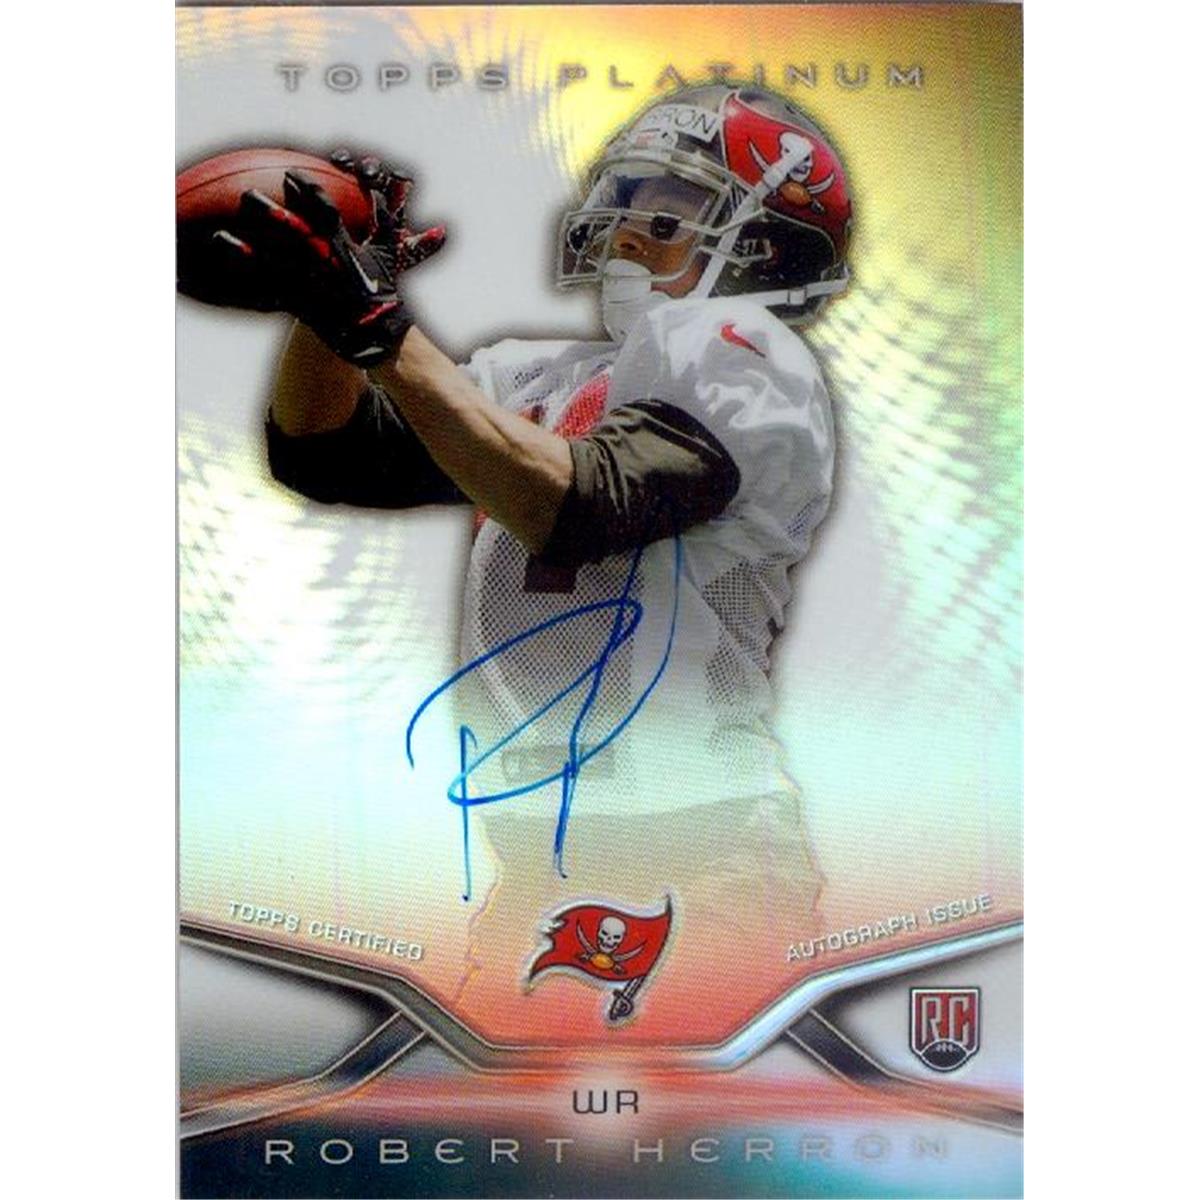 Picture of Autograph Warehouse 444636 Tampa Bay Buccaneers 2014 Topps Bowman Platinum 80 Rookie Refractor Certified Authentic Robert Herron Autographed Football Card